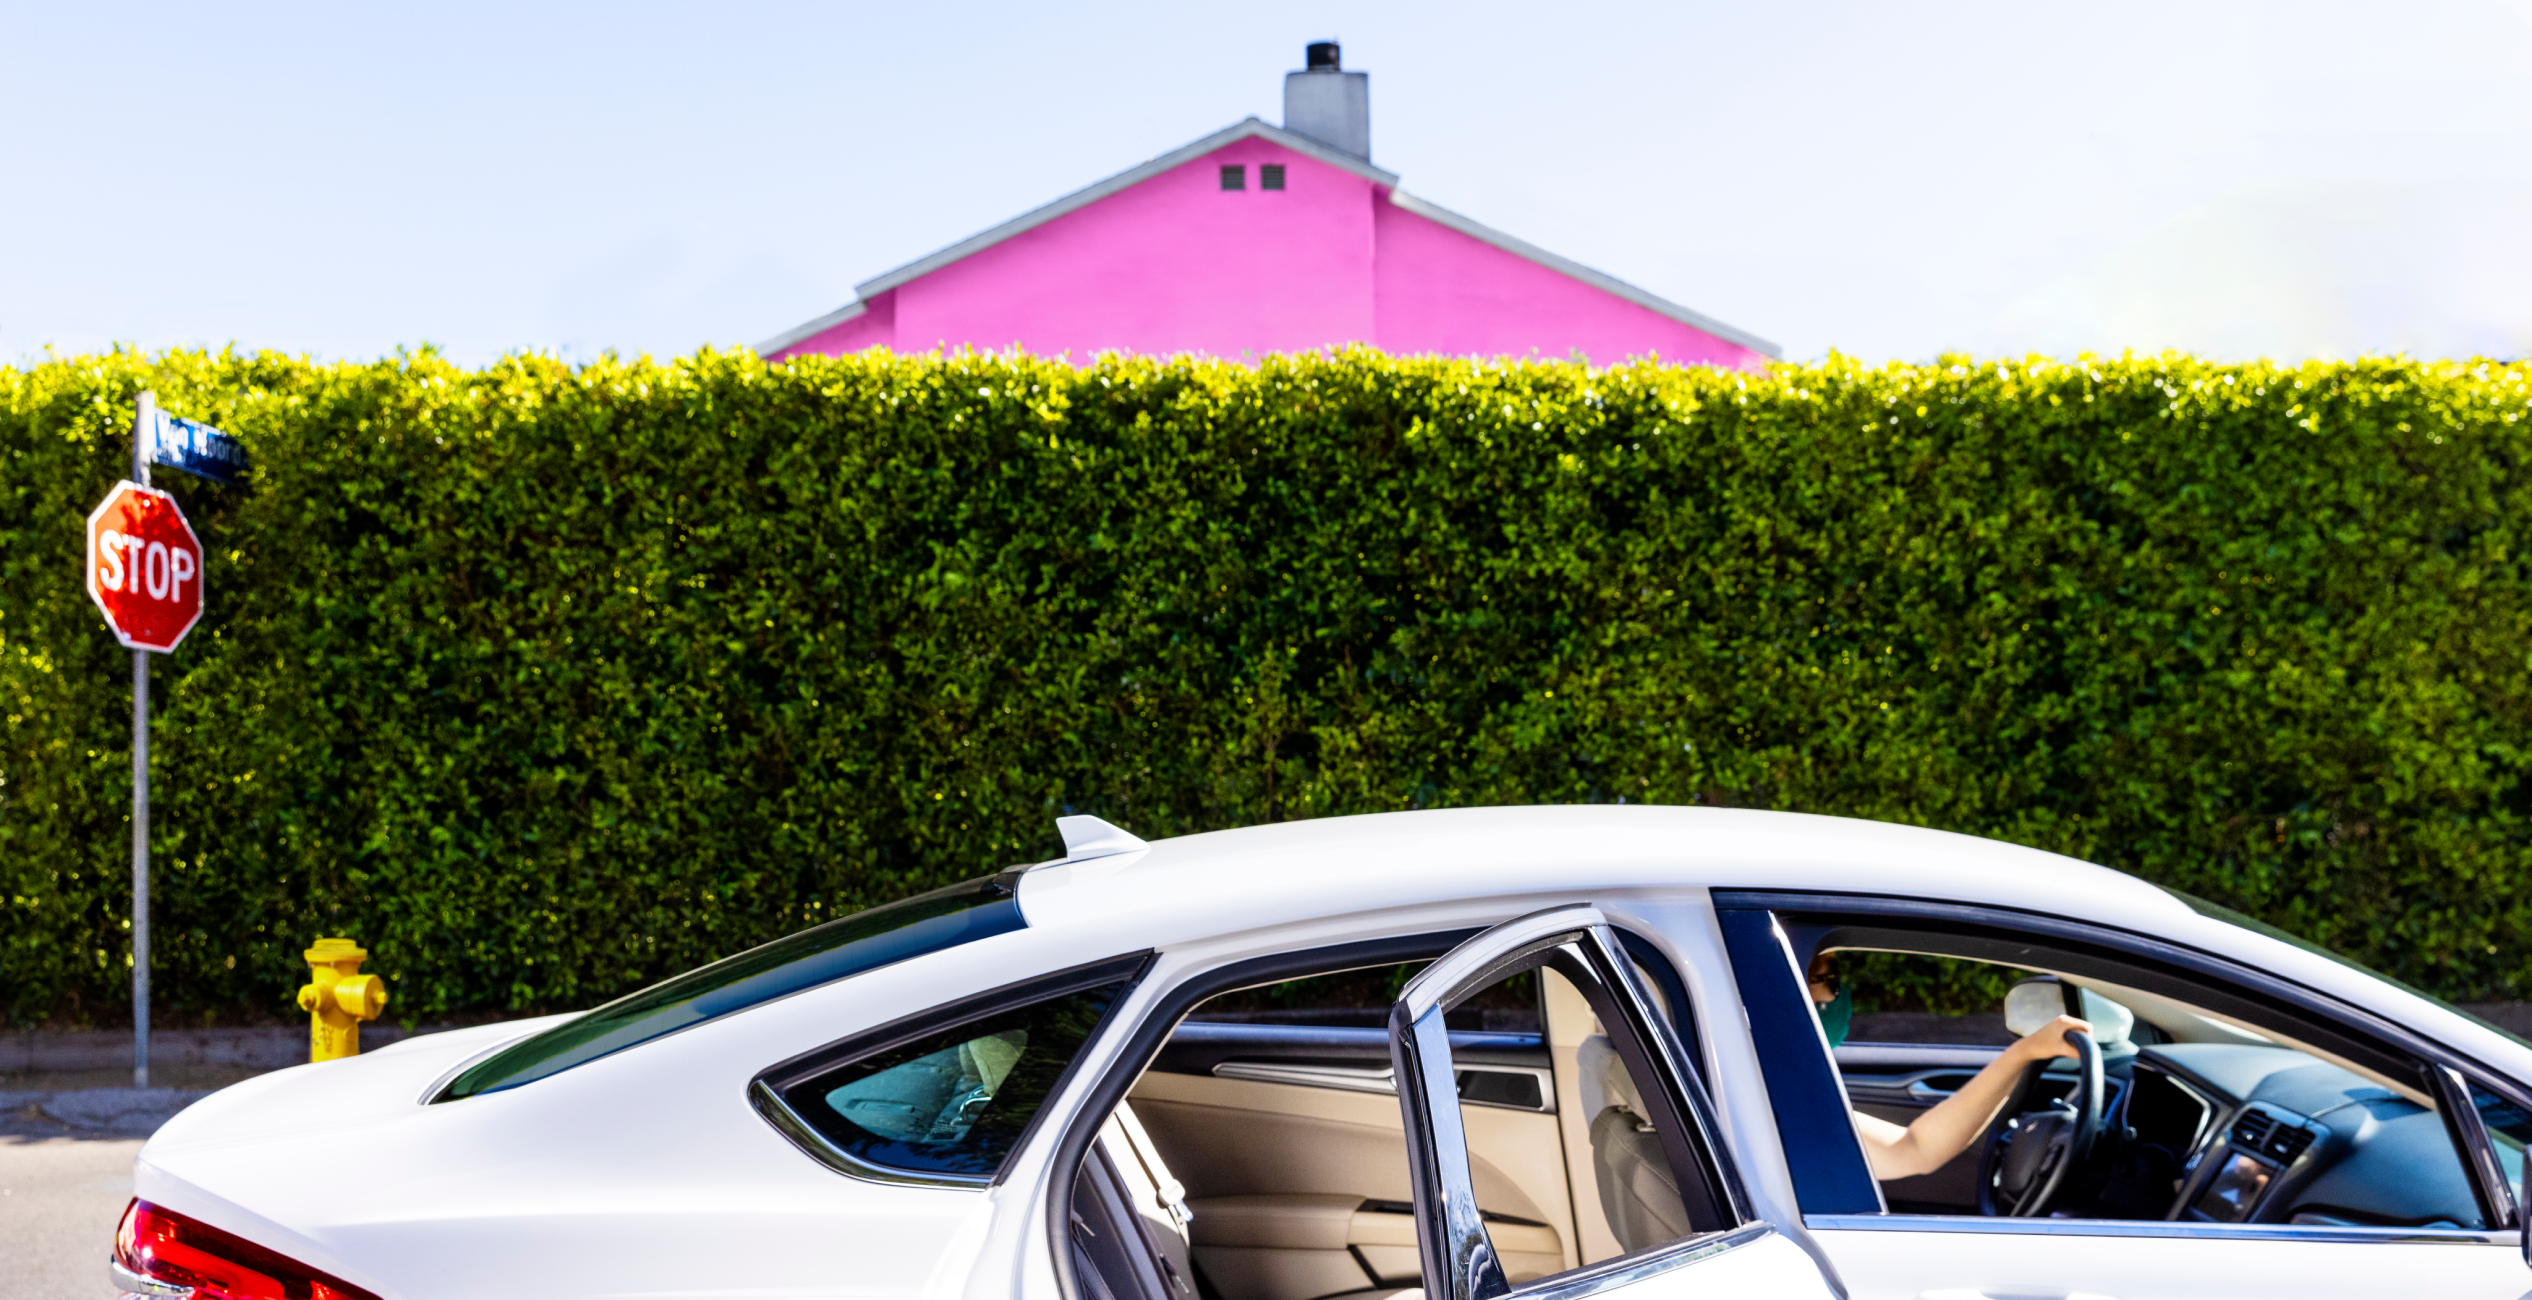 car with door open parked in front of hedges/bushes and pink house